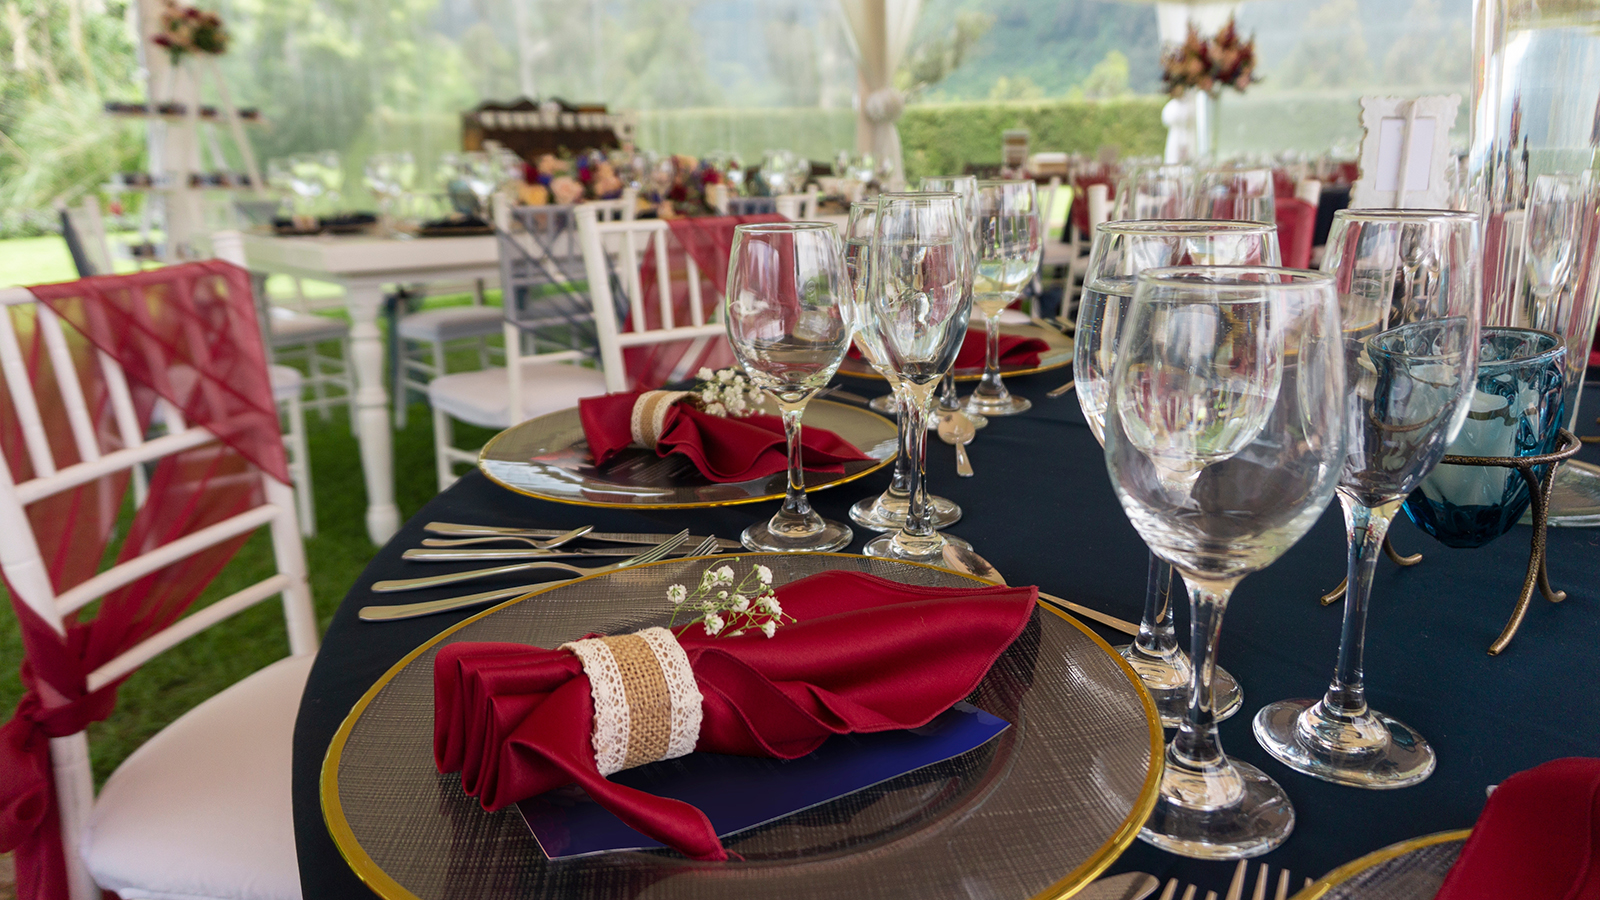 Party table in a garden, decorated with red napkins, blue tablecloth and crystal glasses with a background of white chairs